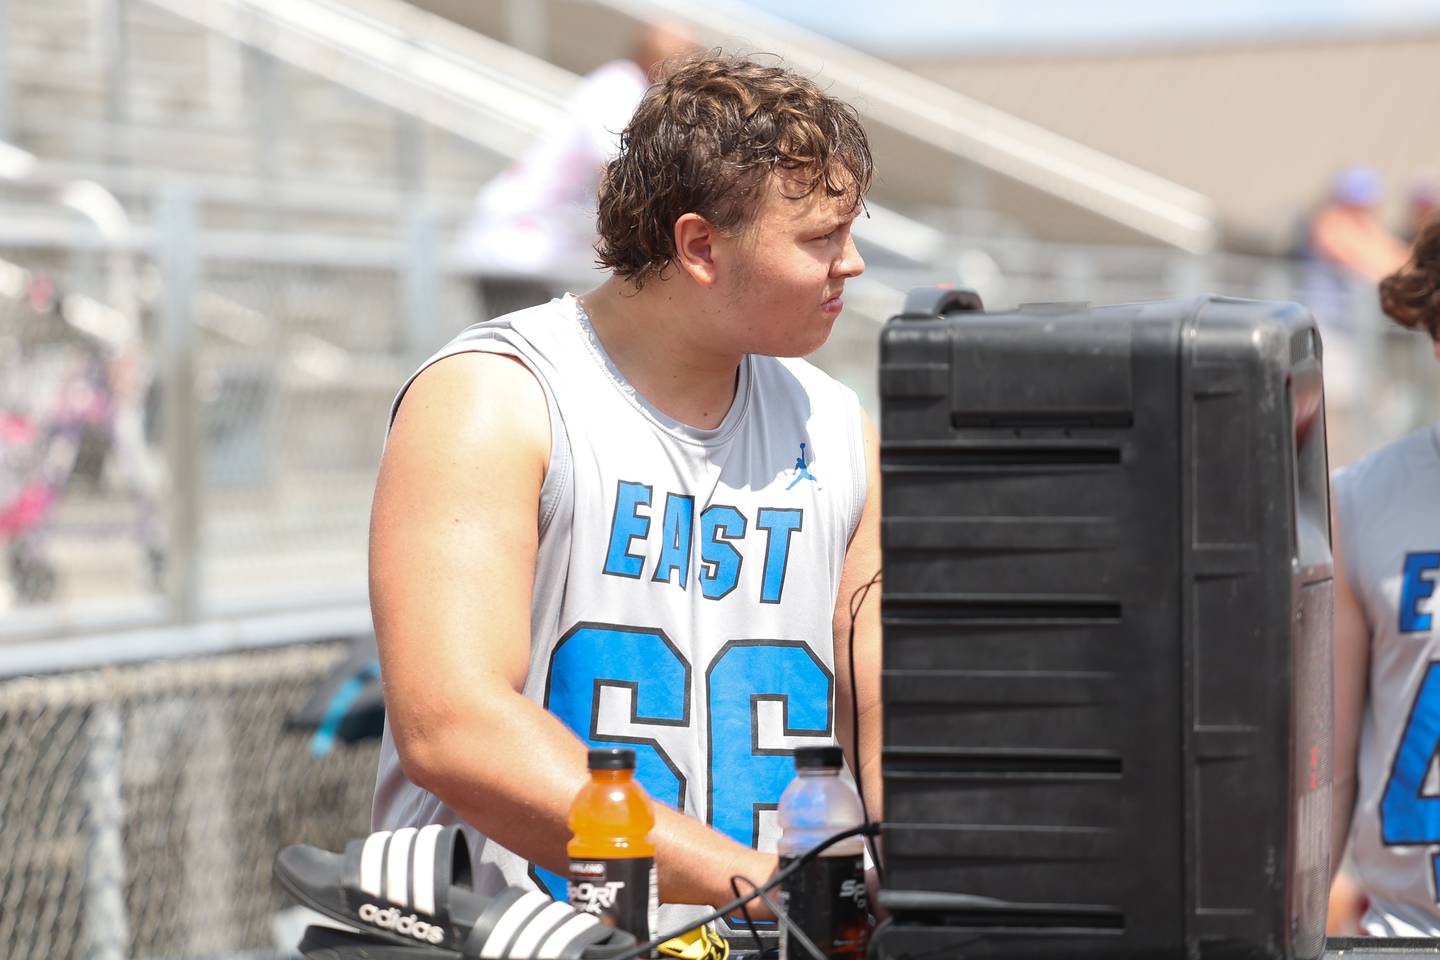 Lincoln-Way East center Josh Janowski works the music playlist during a 7-on-7 scrimmage at Lincoln-Way East on Tuesday, July 18th, 2023 in Frankfort.